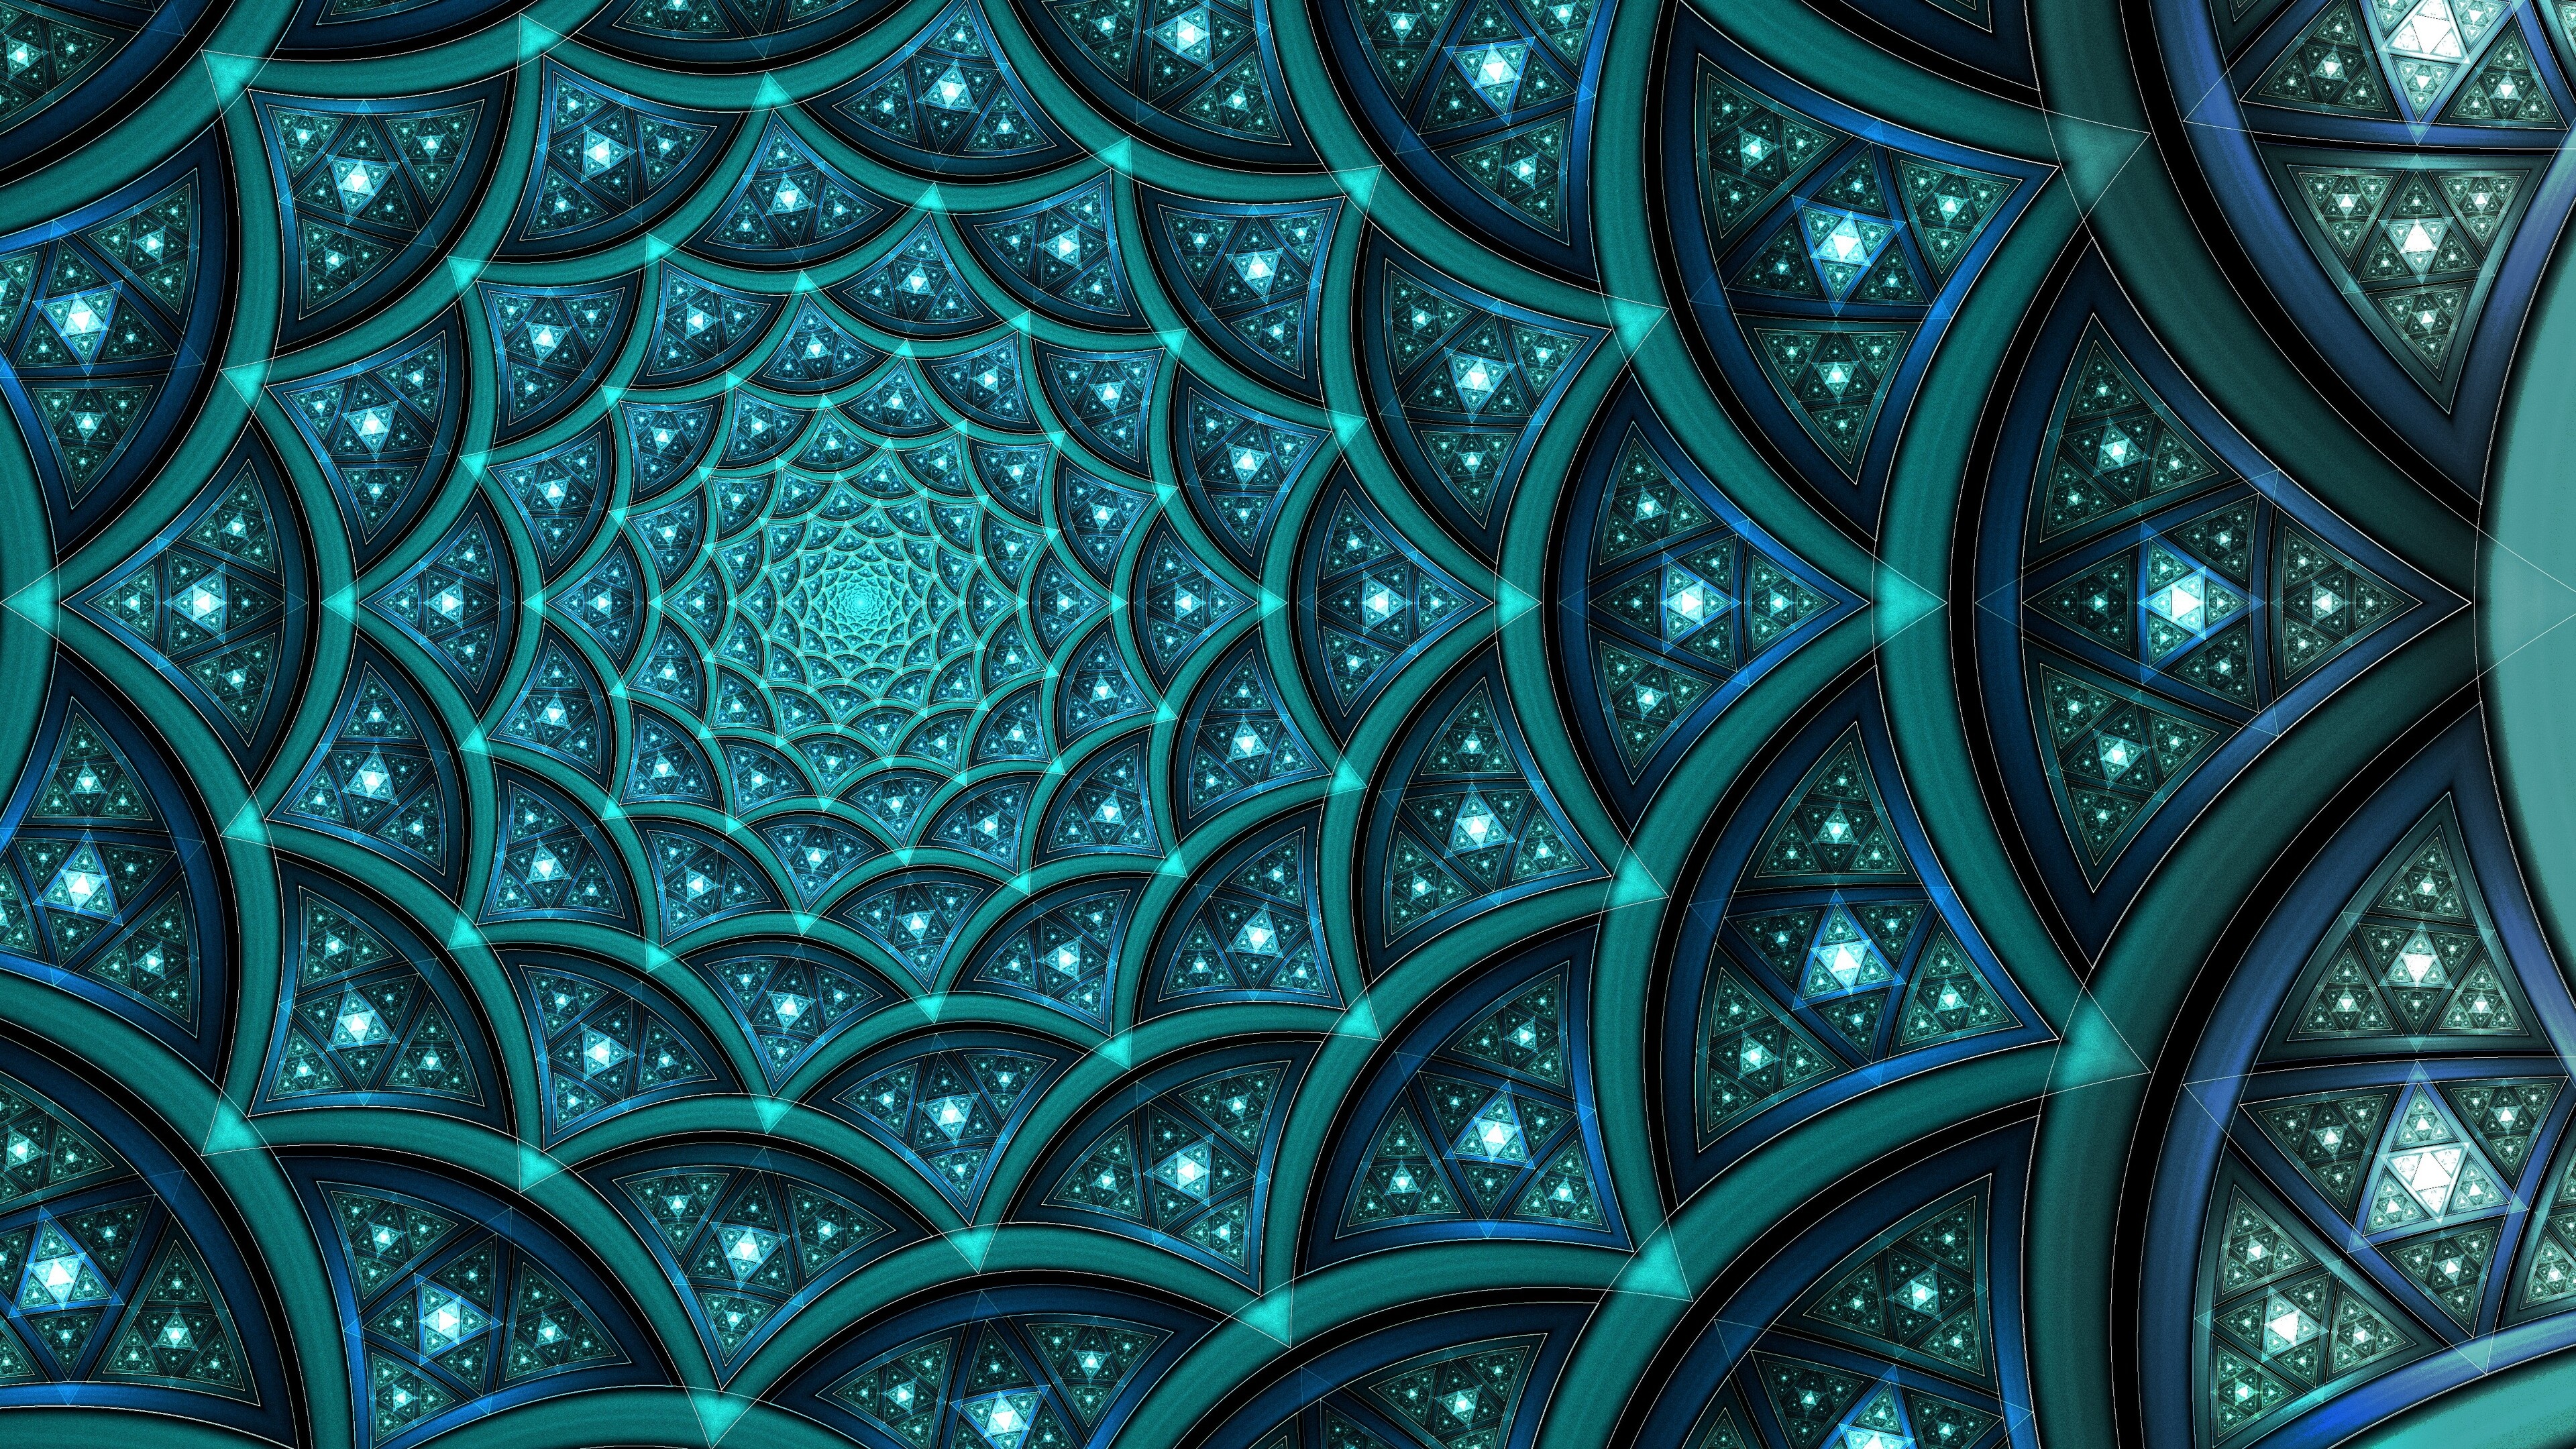 Abstract digital art, Fractal patterns, Colorful imagery, Abstract design, 3840x2160 4K Desktop